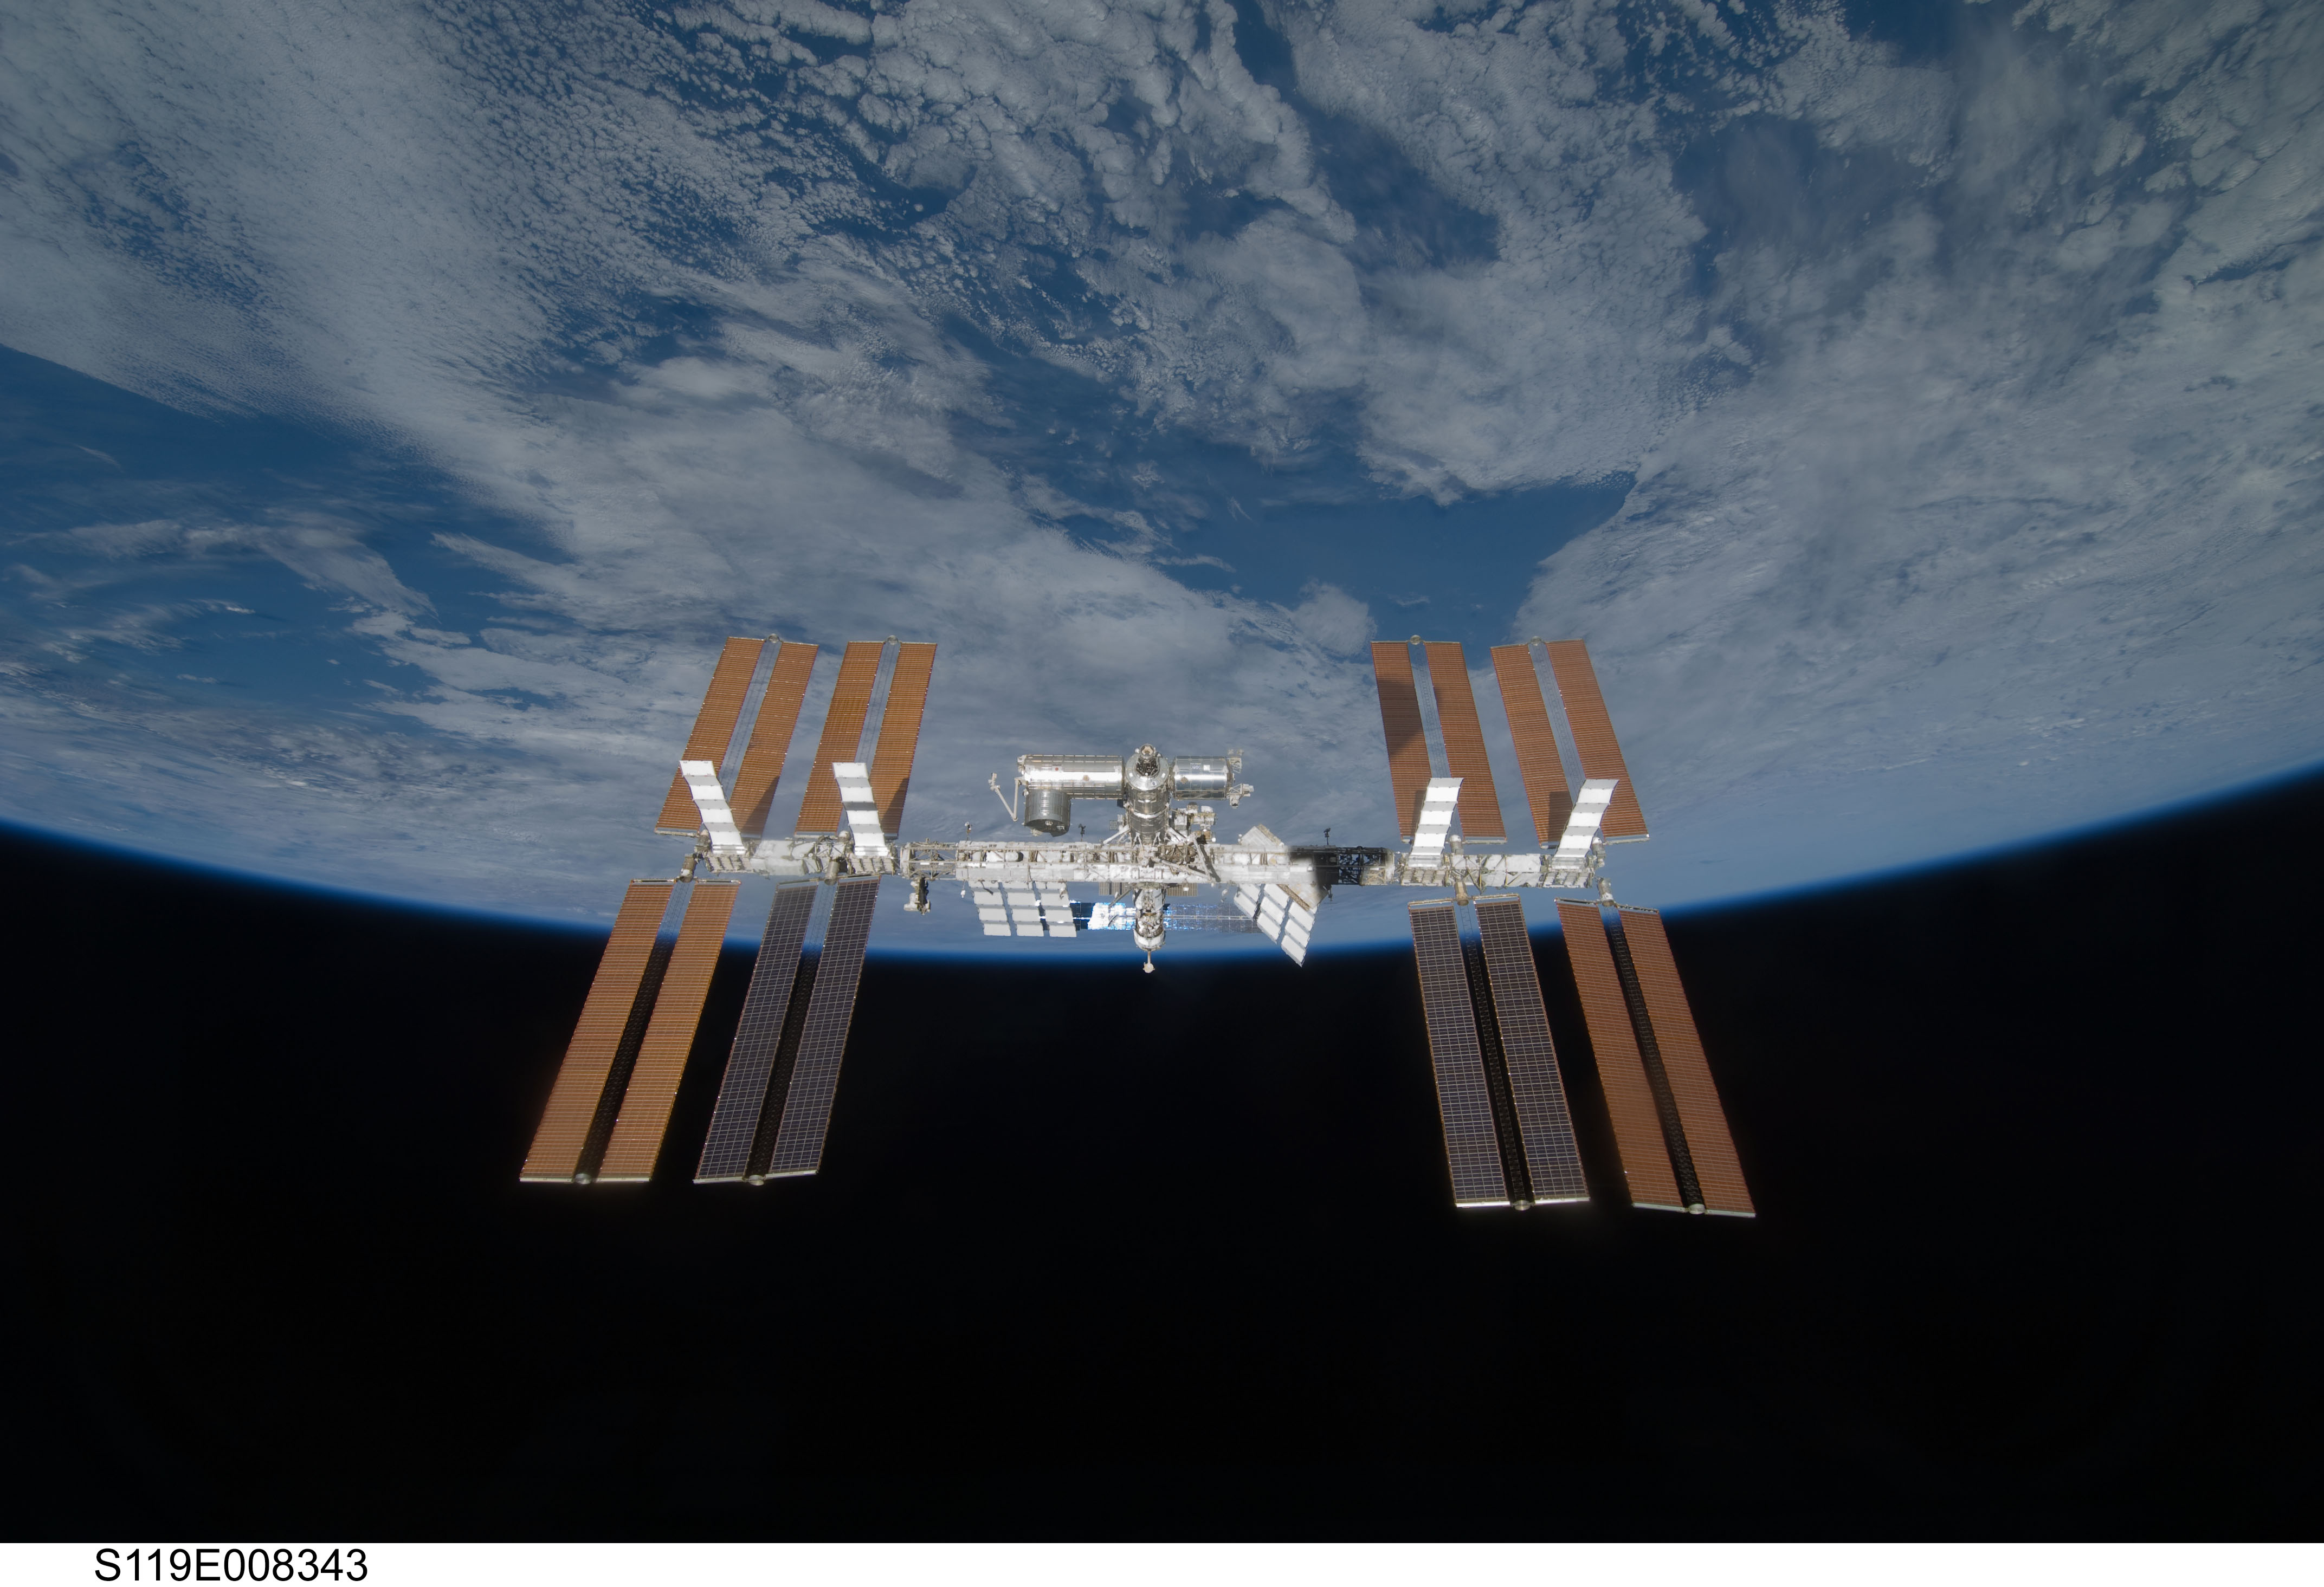 international space station cross section